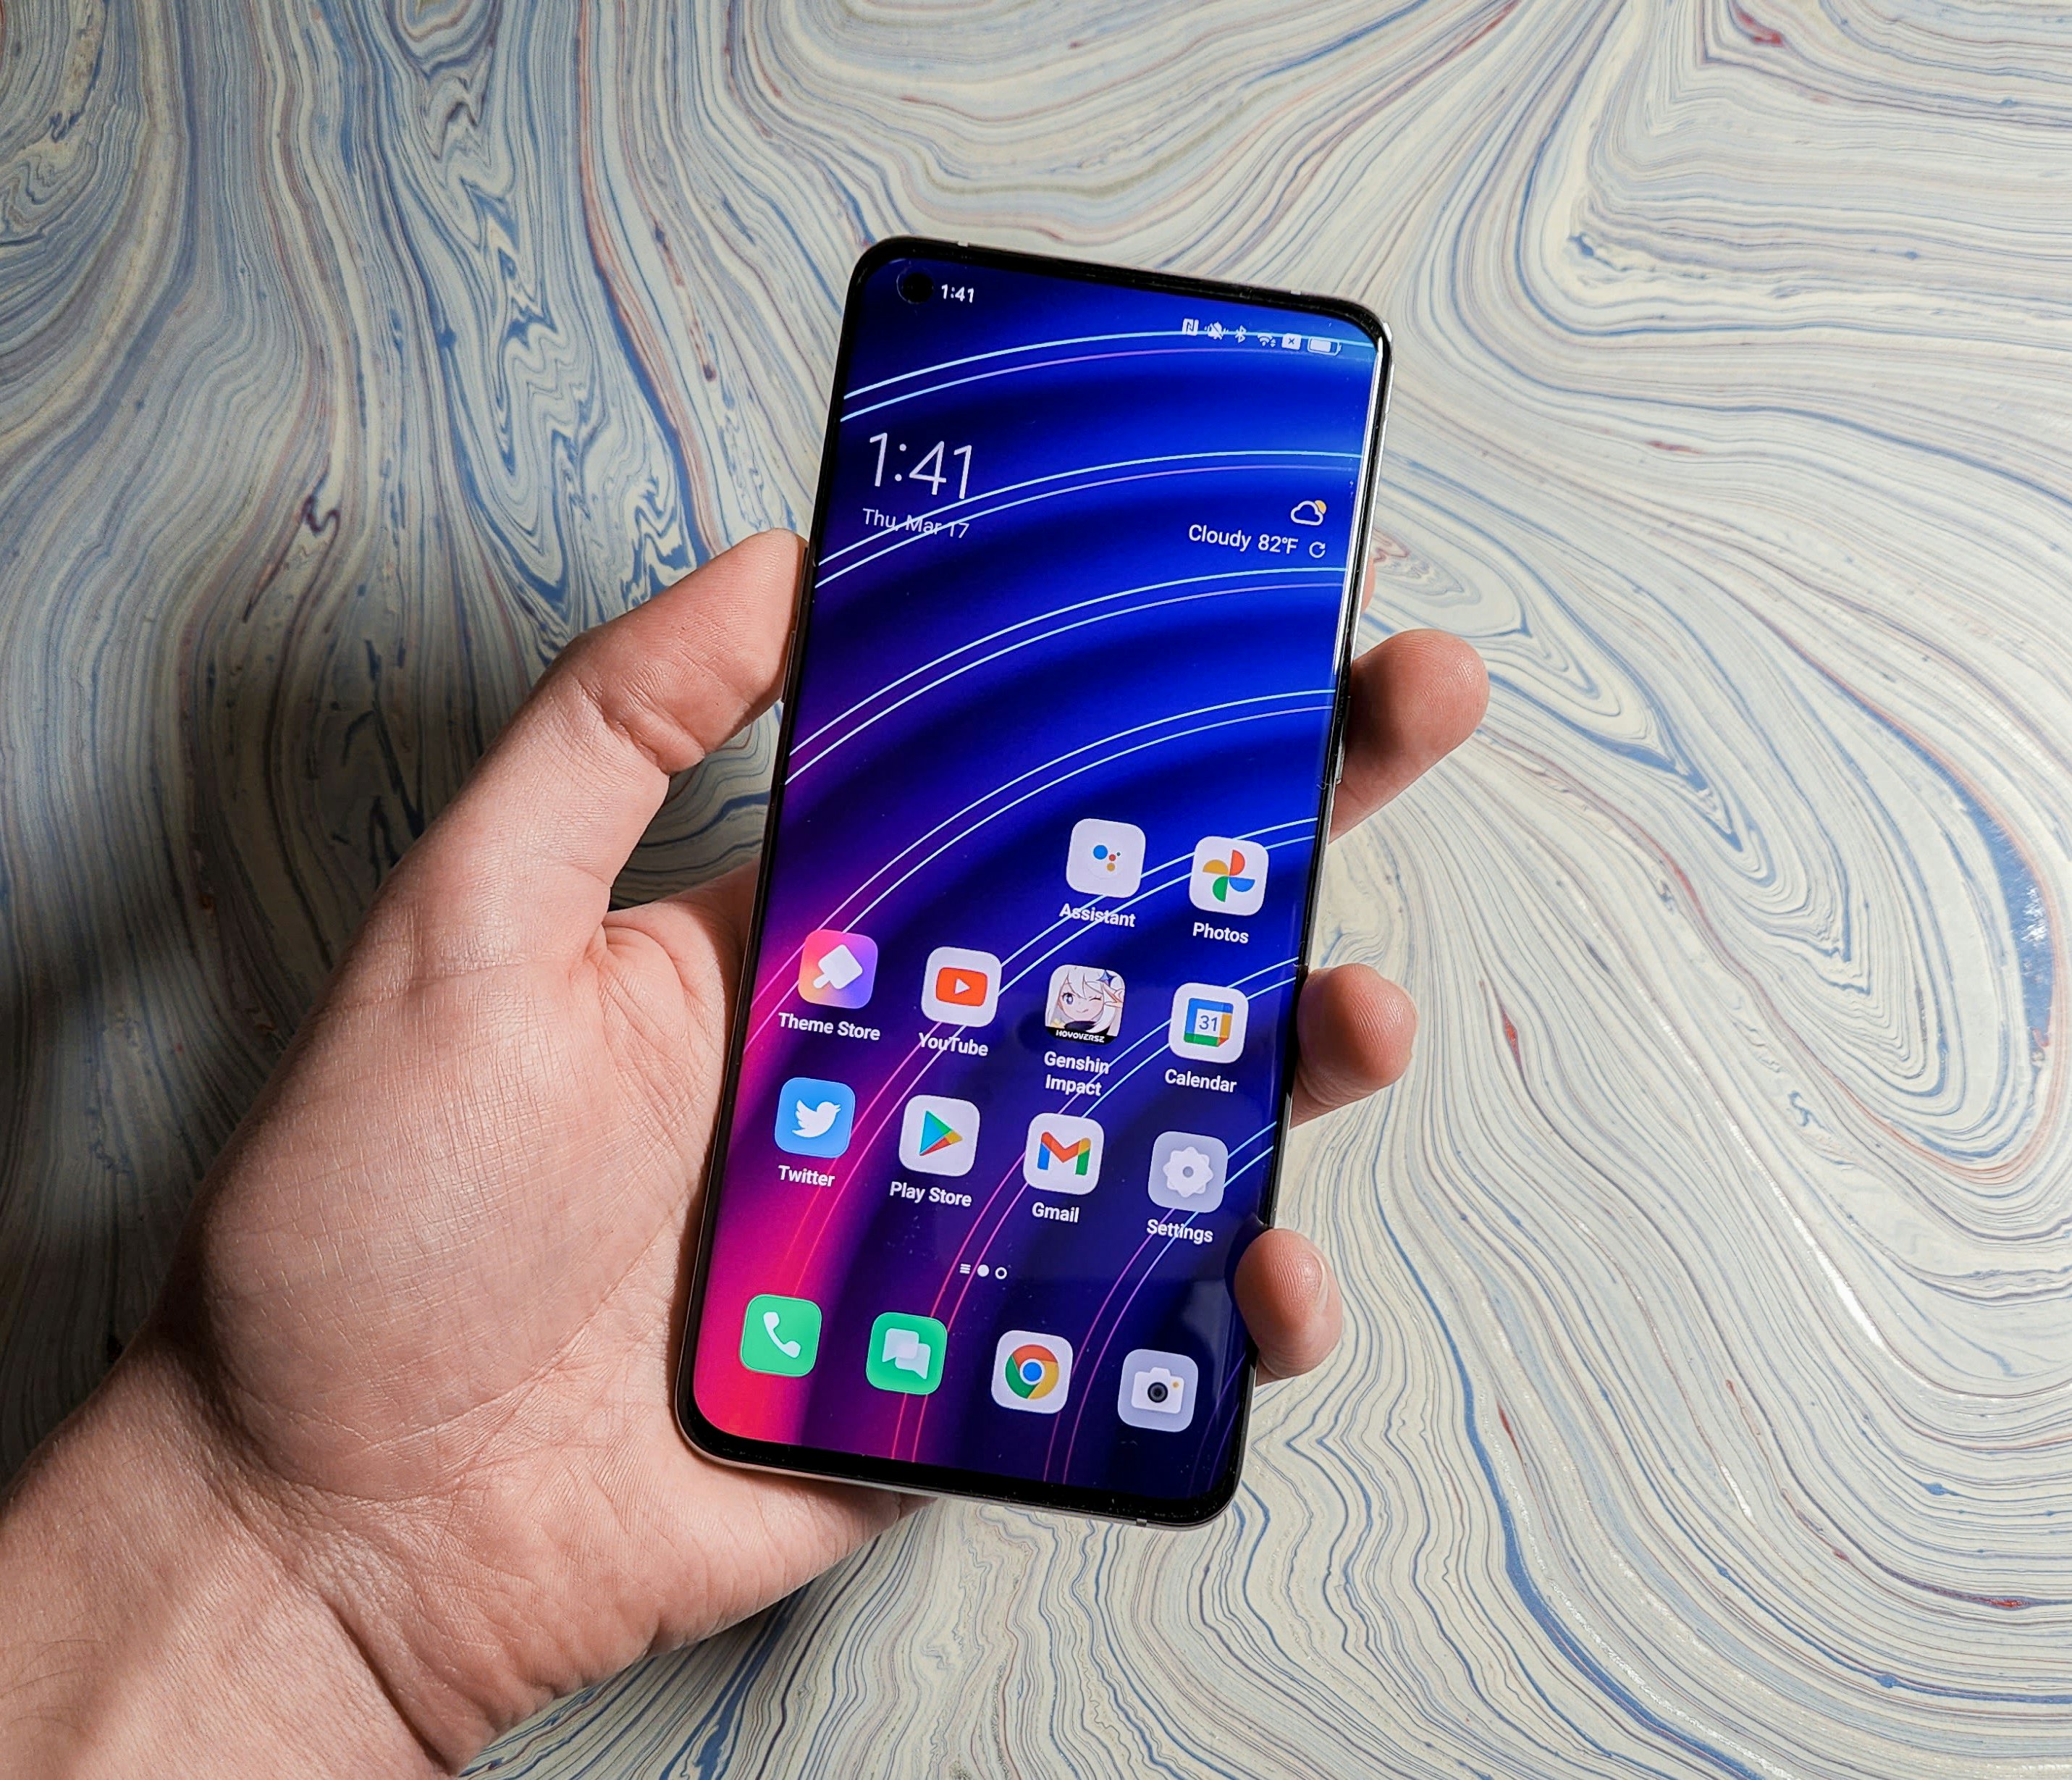 Oppo Find X5 Pro. It is amazing. Feel free to ask me things about